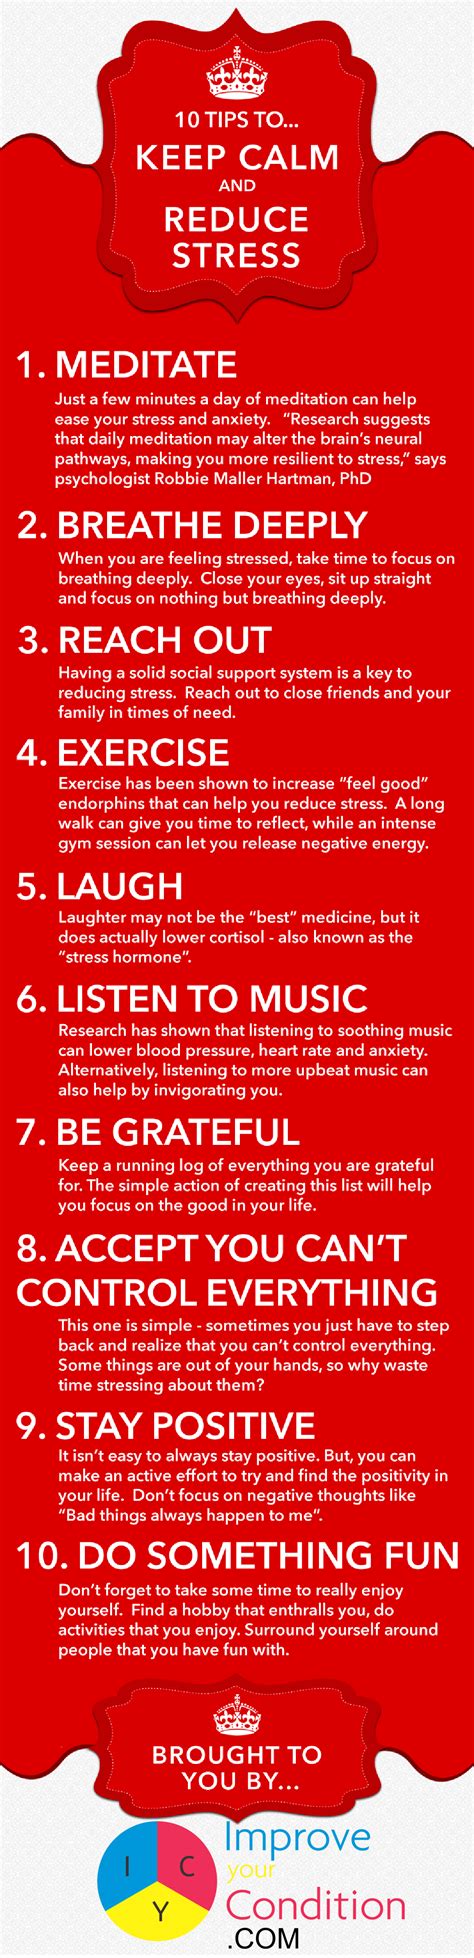 10 Stress Relief Tips For Caregivers Infographic Dailycaring